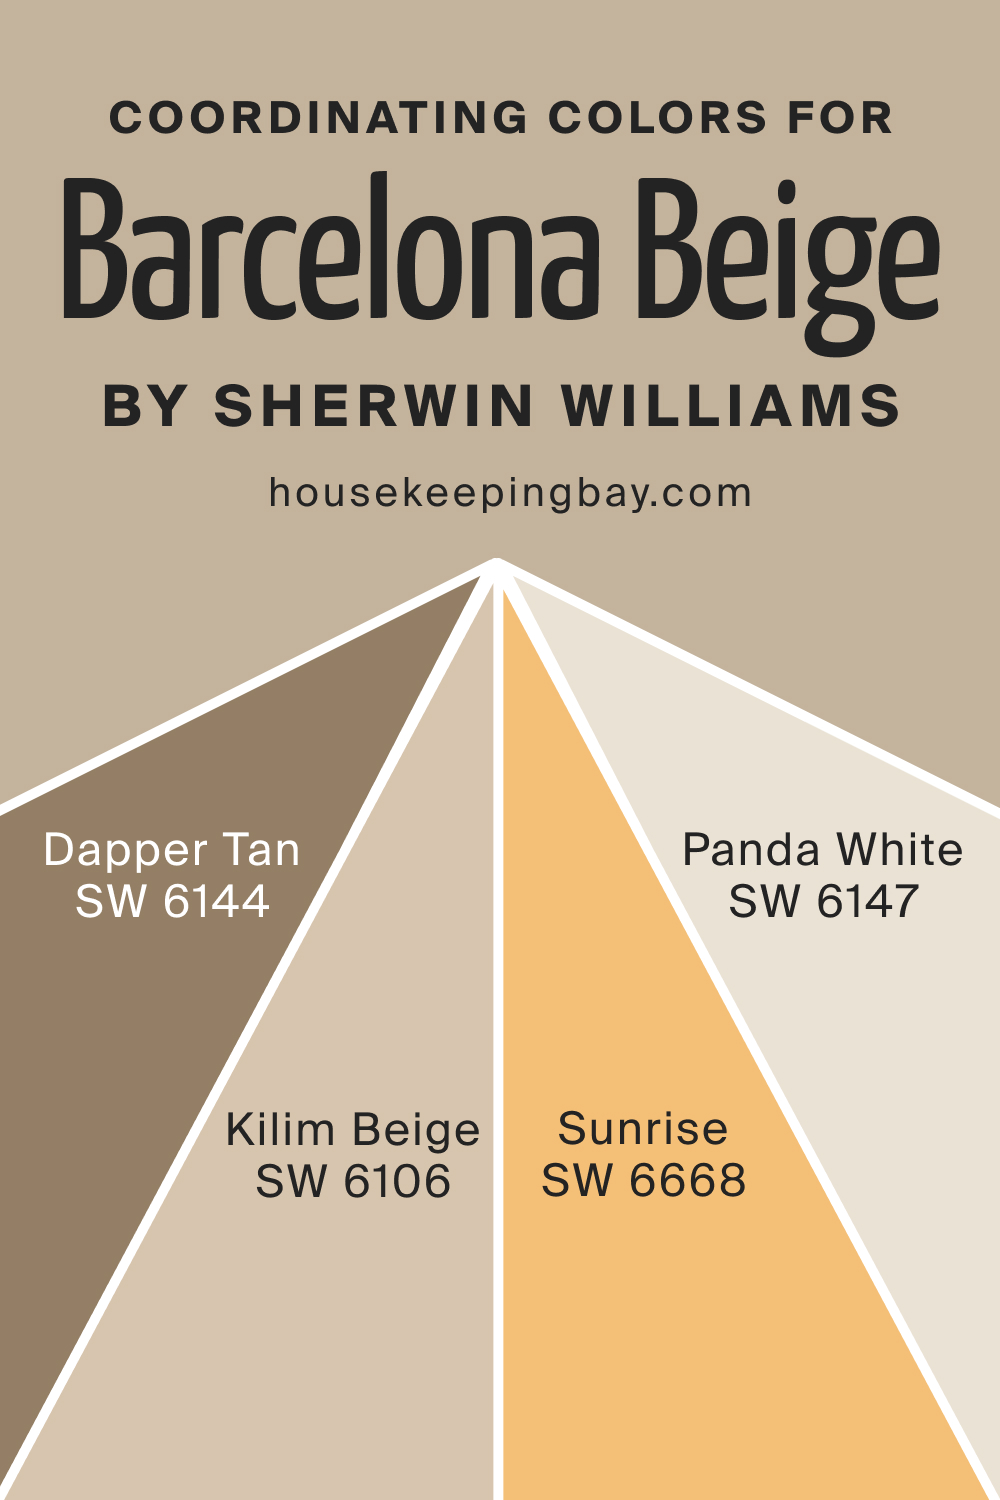 Coordinating Colors for Barcelona Beige by Sherwin Williams